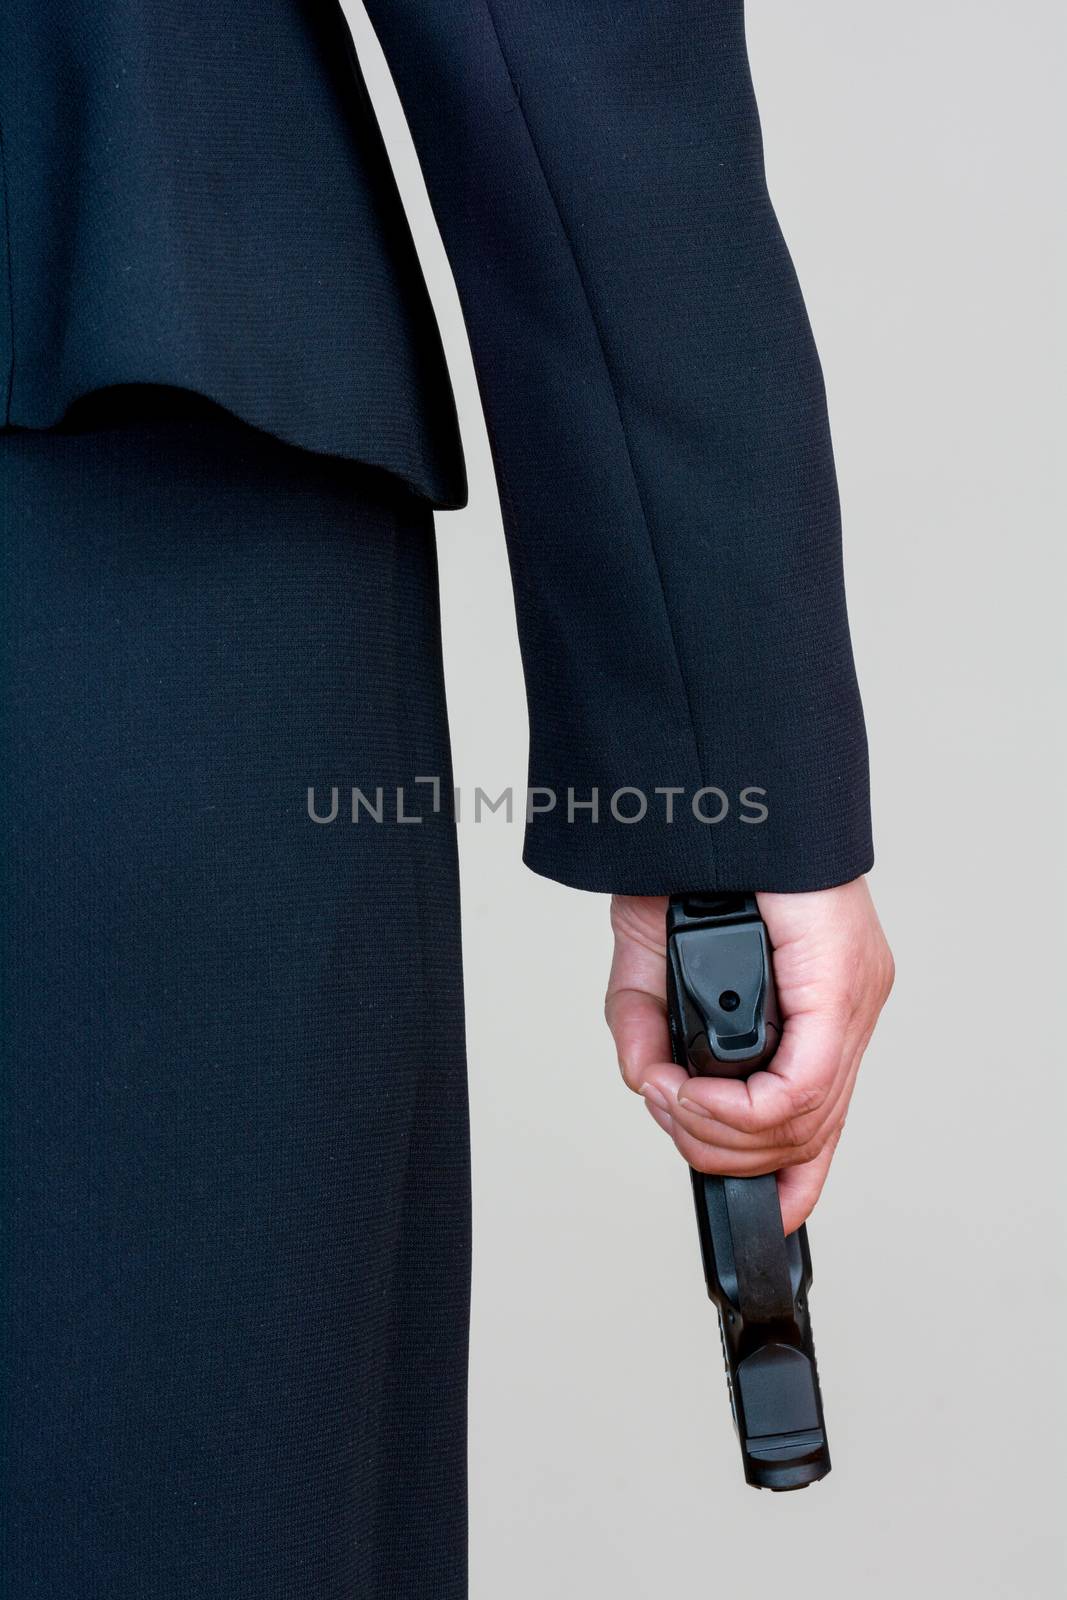 Woman holding hand gun on white background by IVYPHOTOS